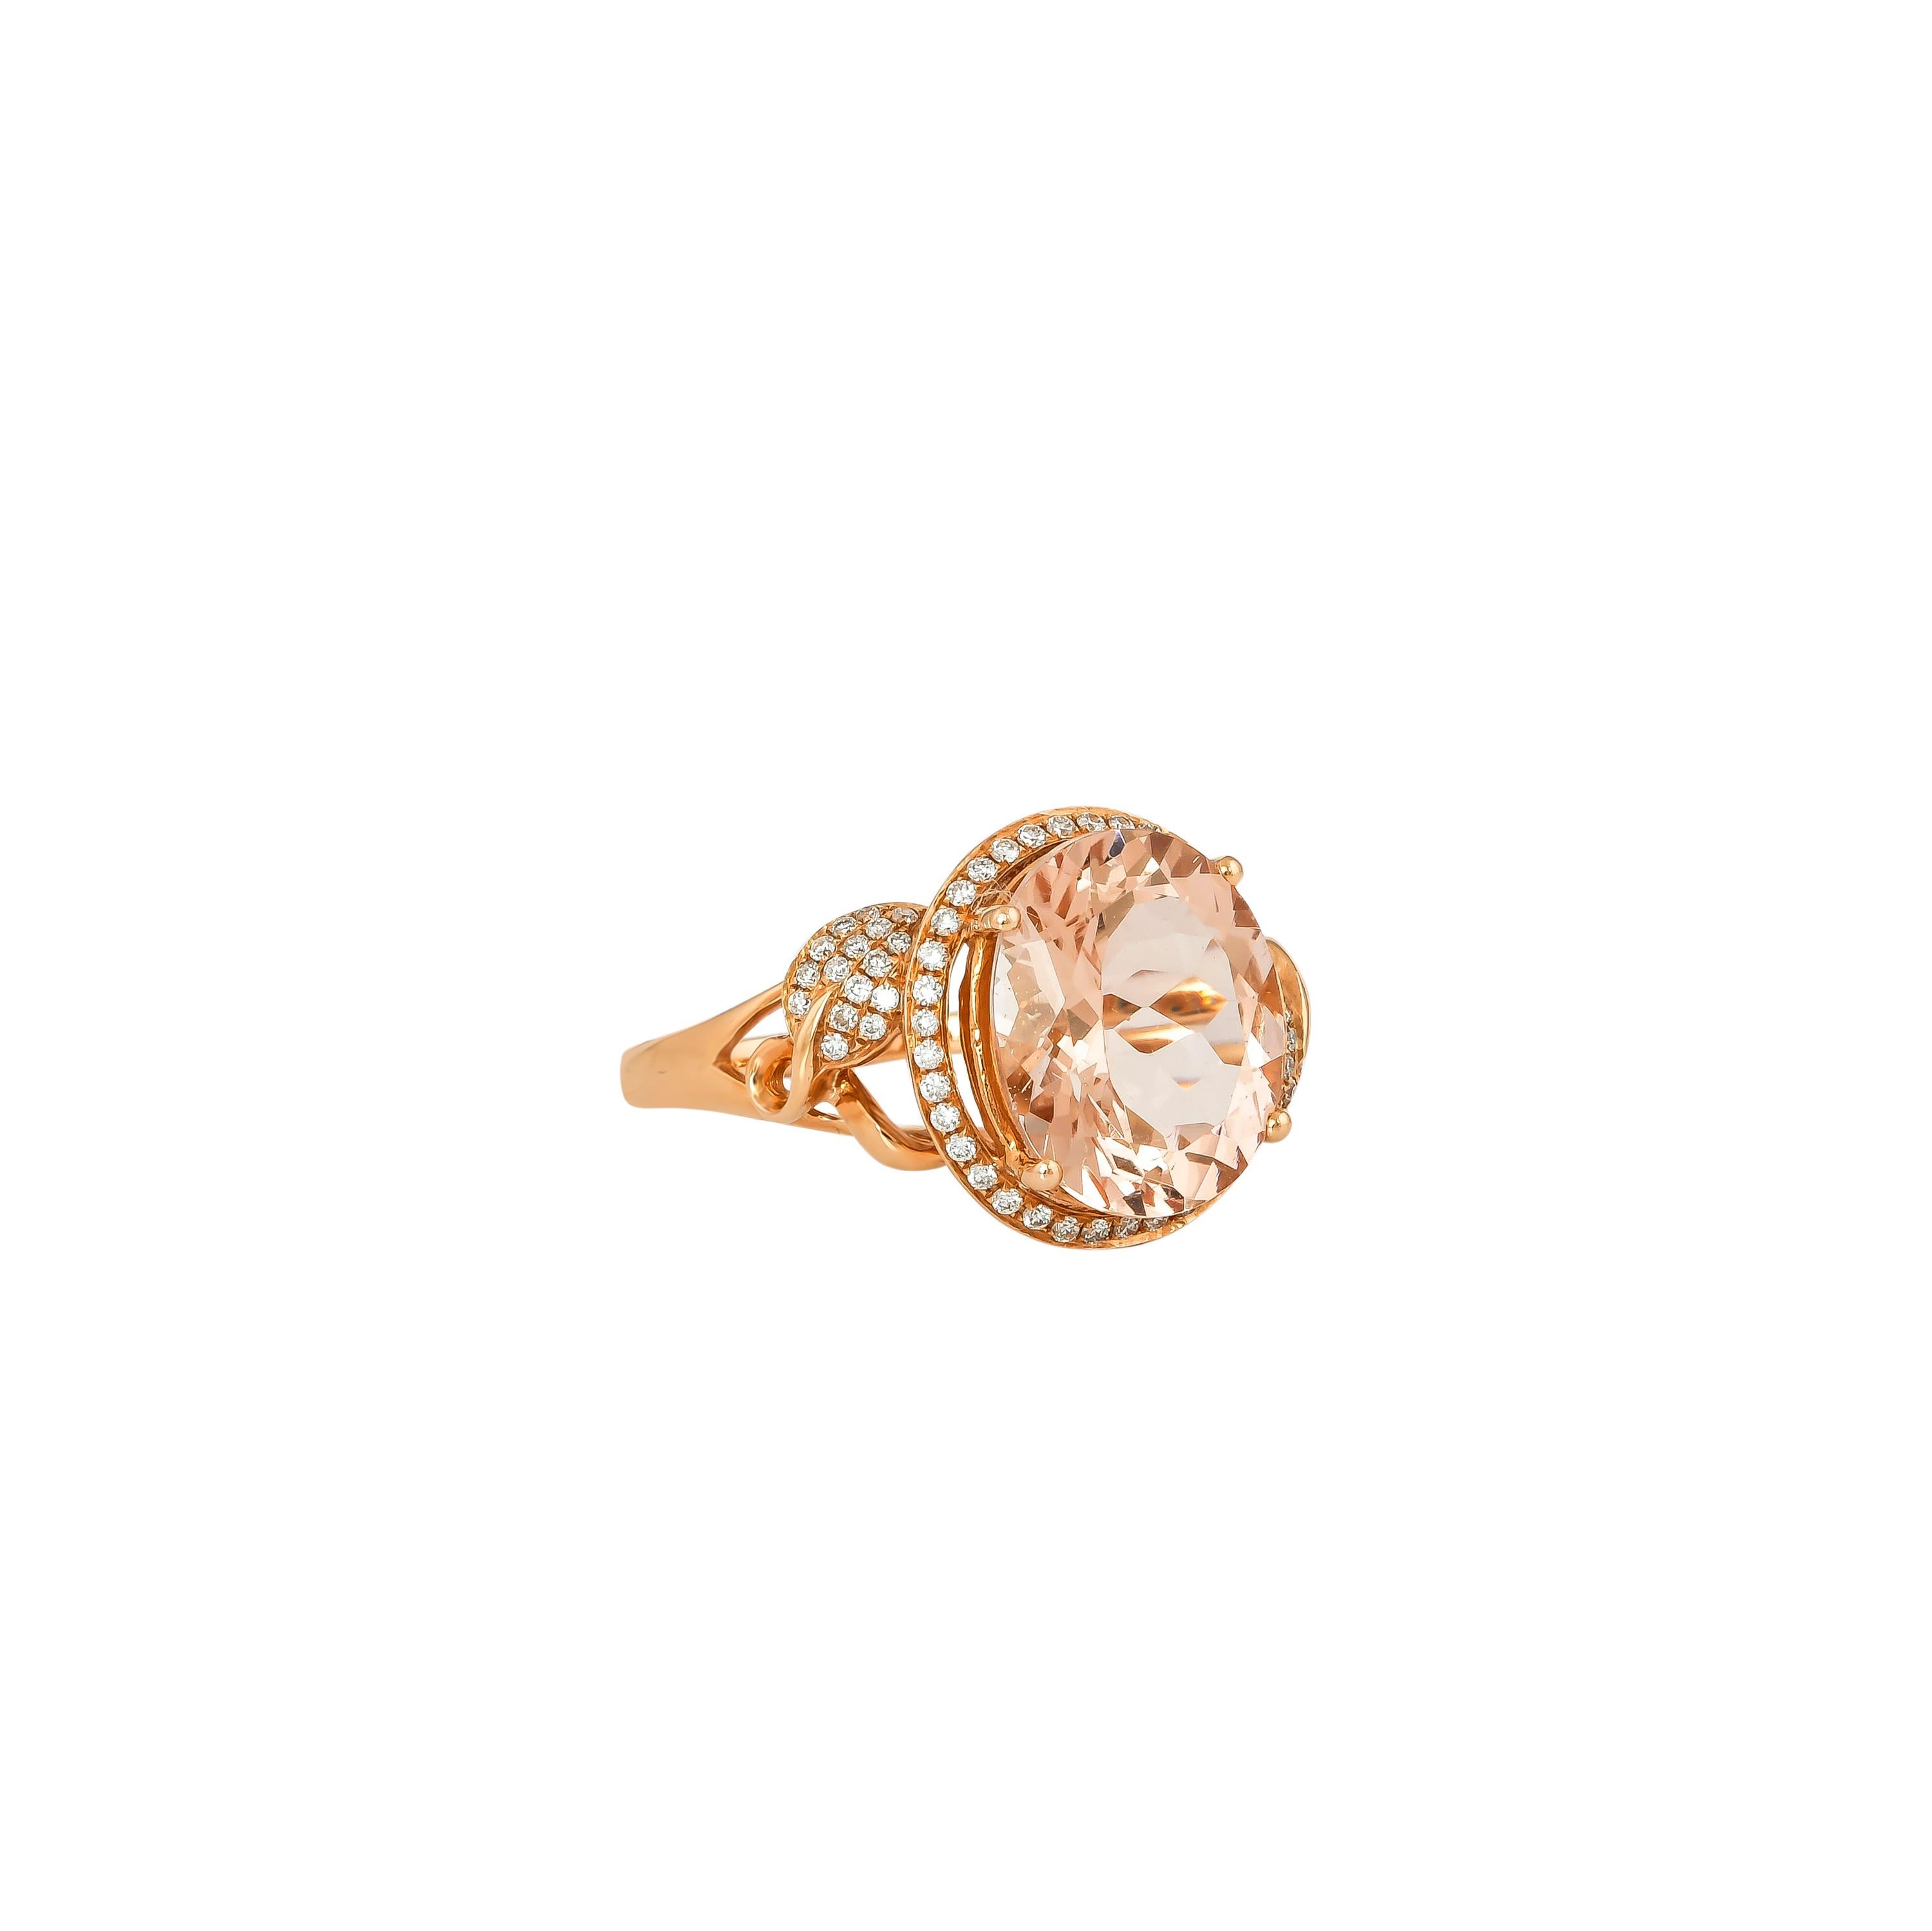 This collection features an array of magnificent morganites! Accented with diamonds these rings are made in rose gold and present a classic yet elegant look. 

Classic morganite ring in 18K rose gold with diamonds. 

Morganite: 4.17 carat oval